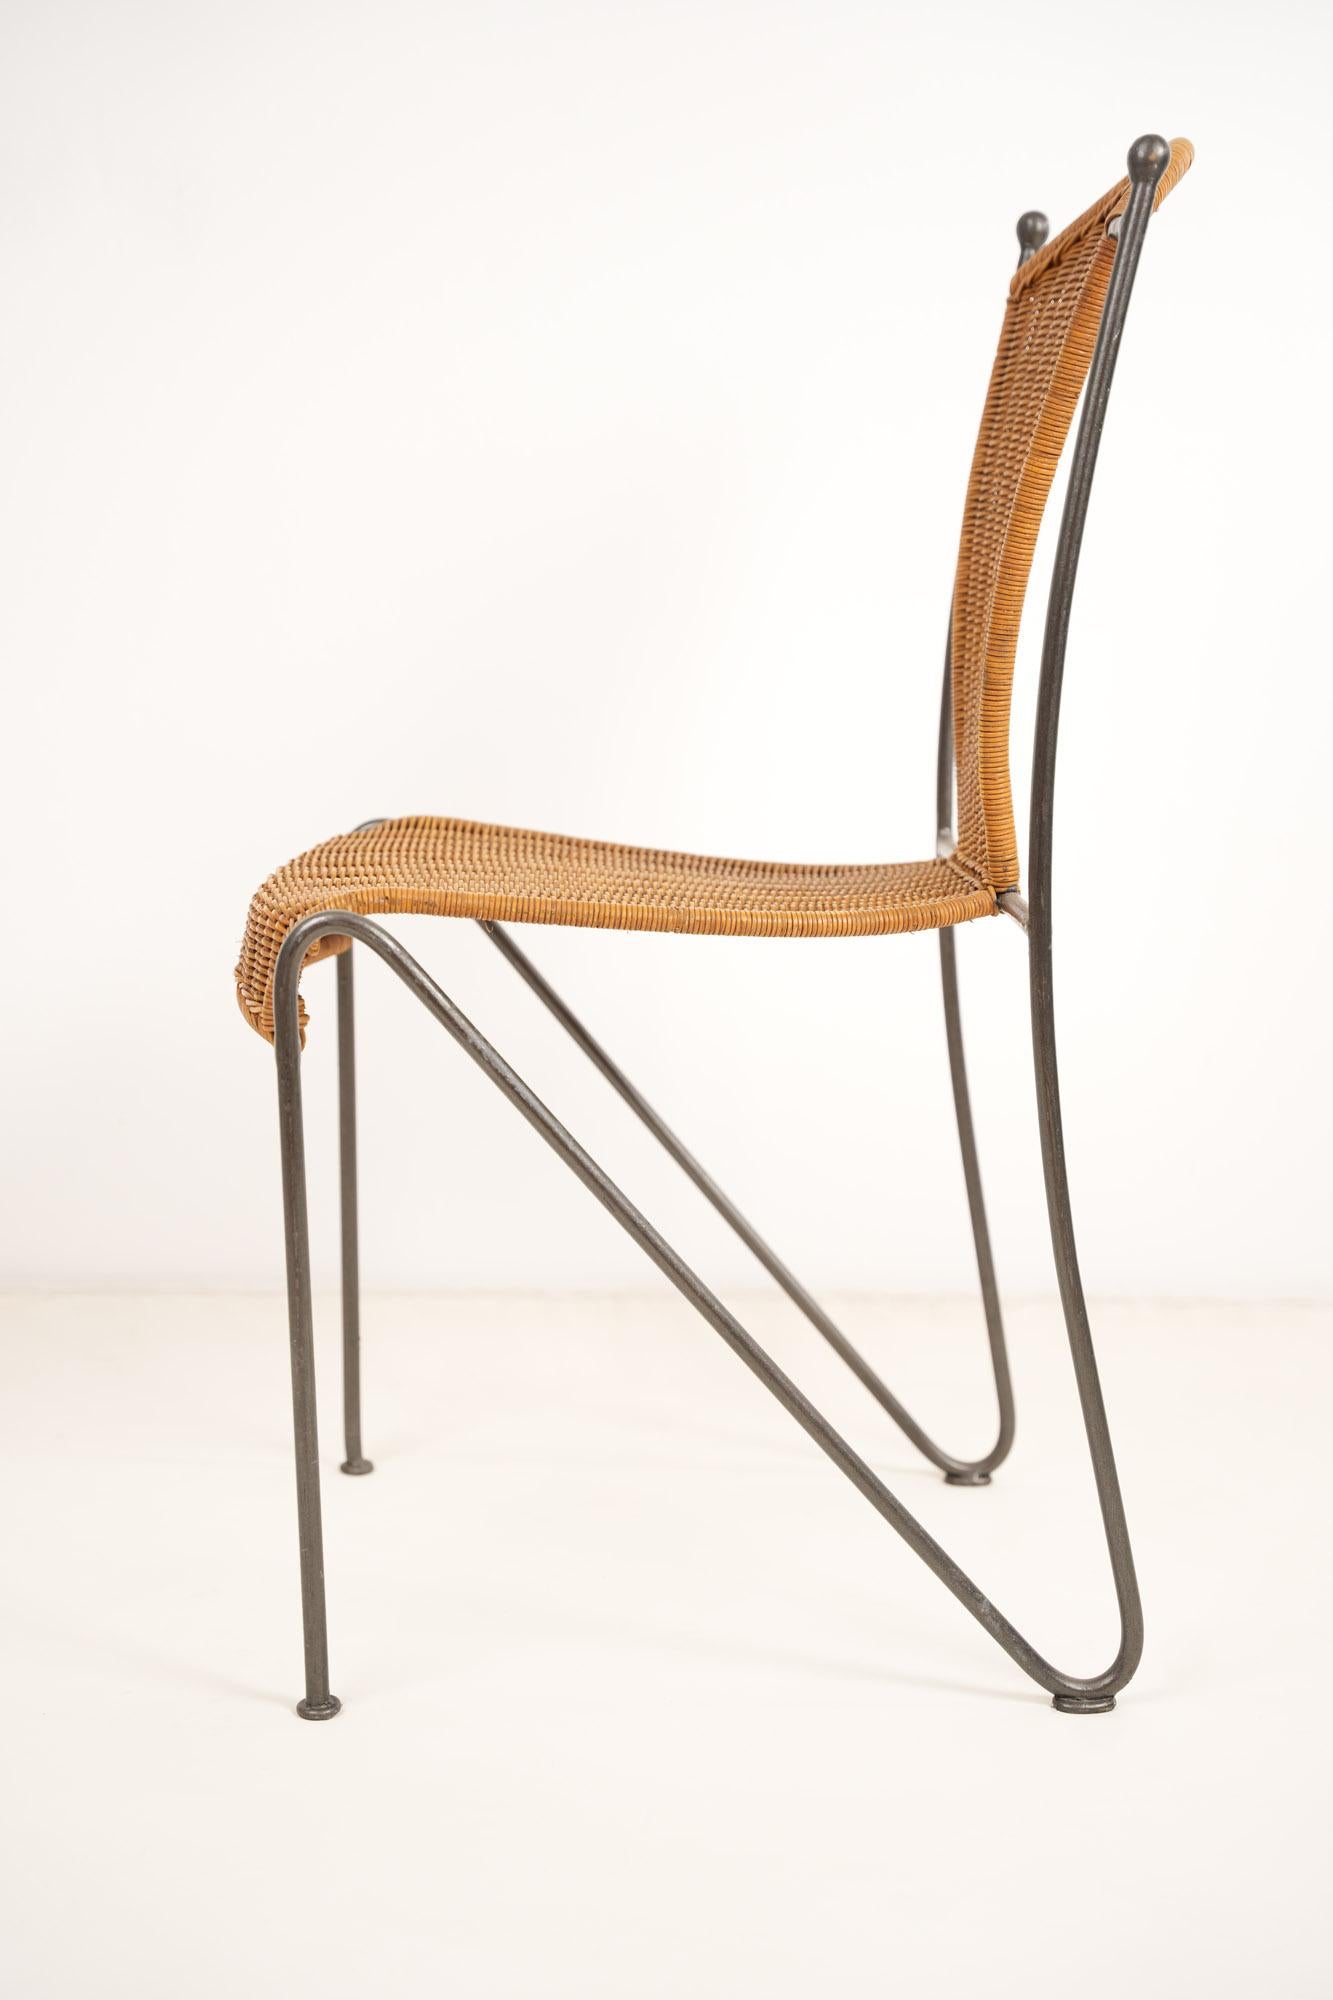 Mid-Century Modern Wicker and Iron Chair By Frederic Weinberg 1950s For Sale